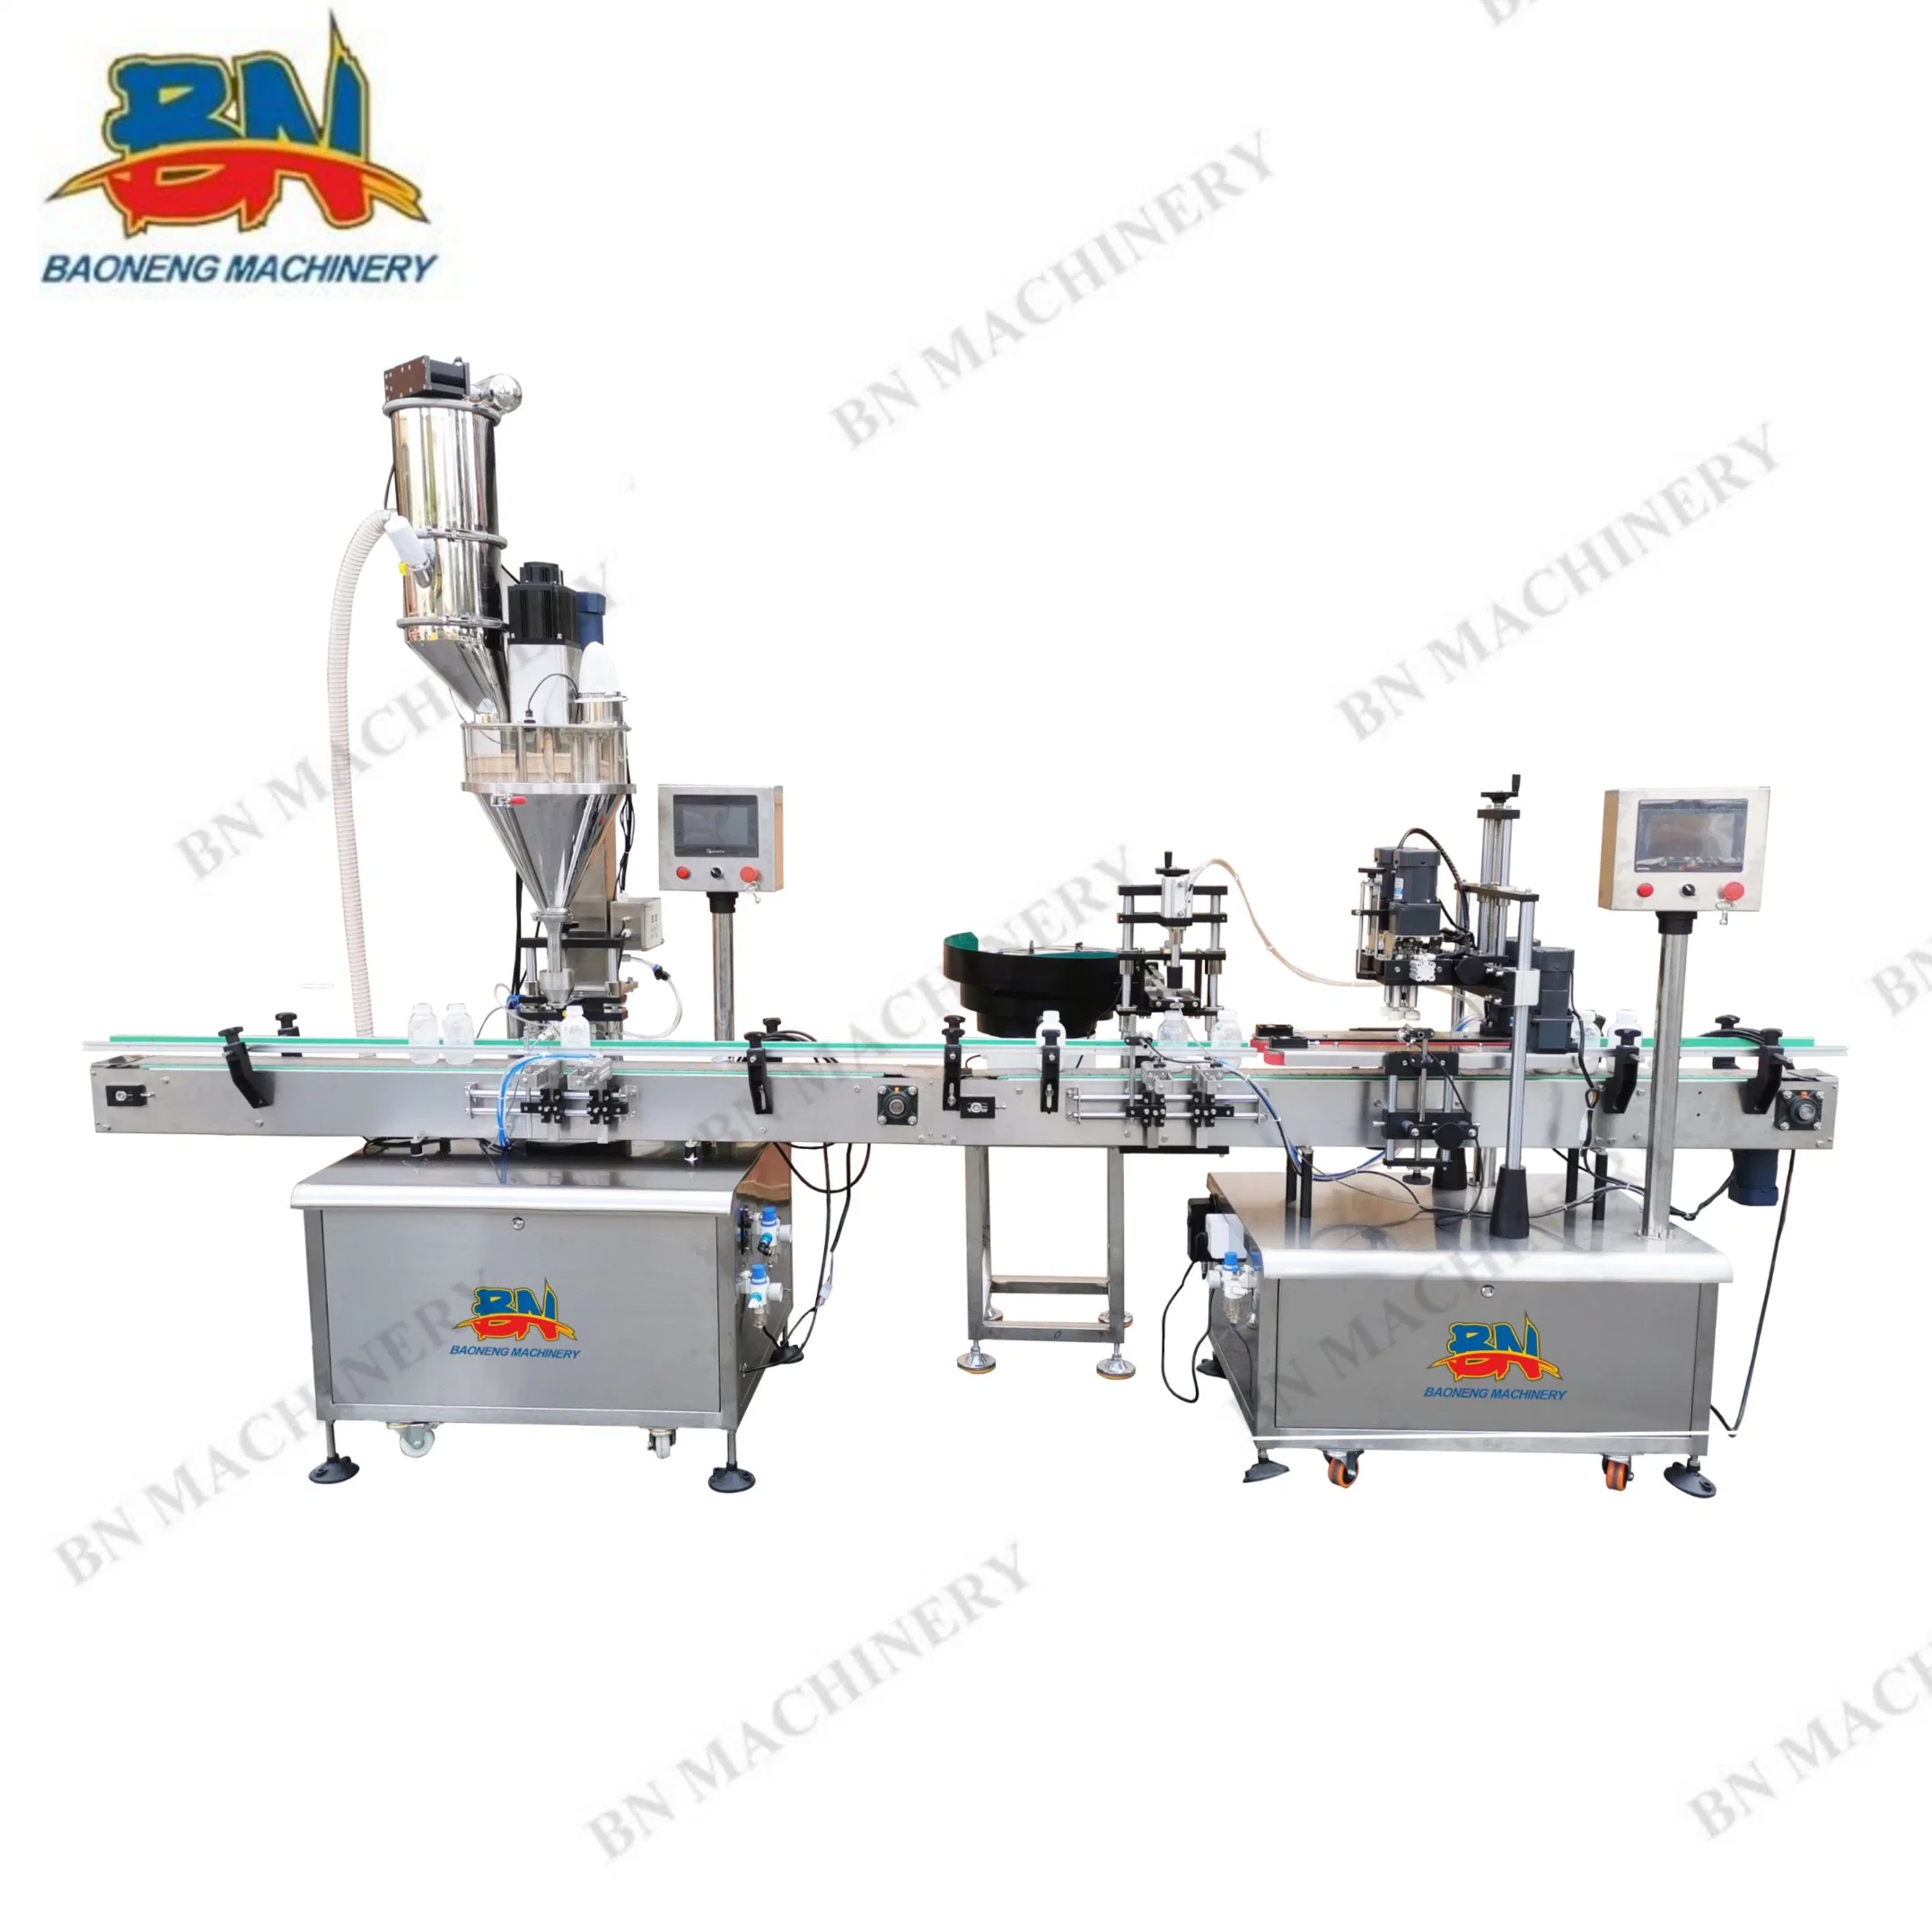 Famous Brand Automatic Bottle Pharmaceutical Powder Filling Equipment with Capping Line in Good Package